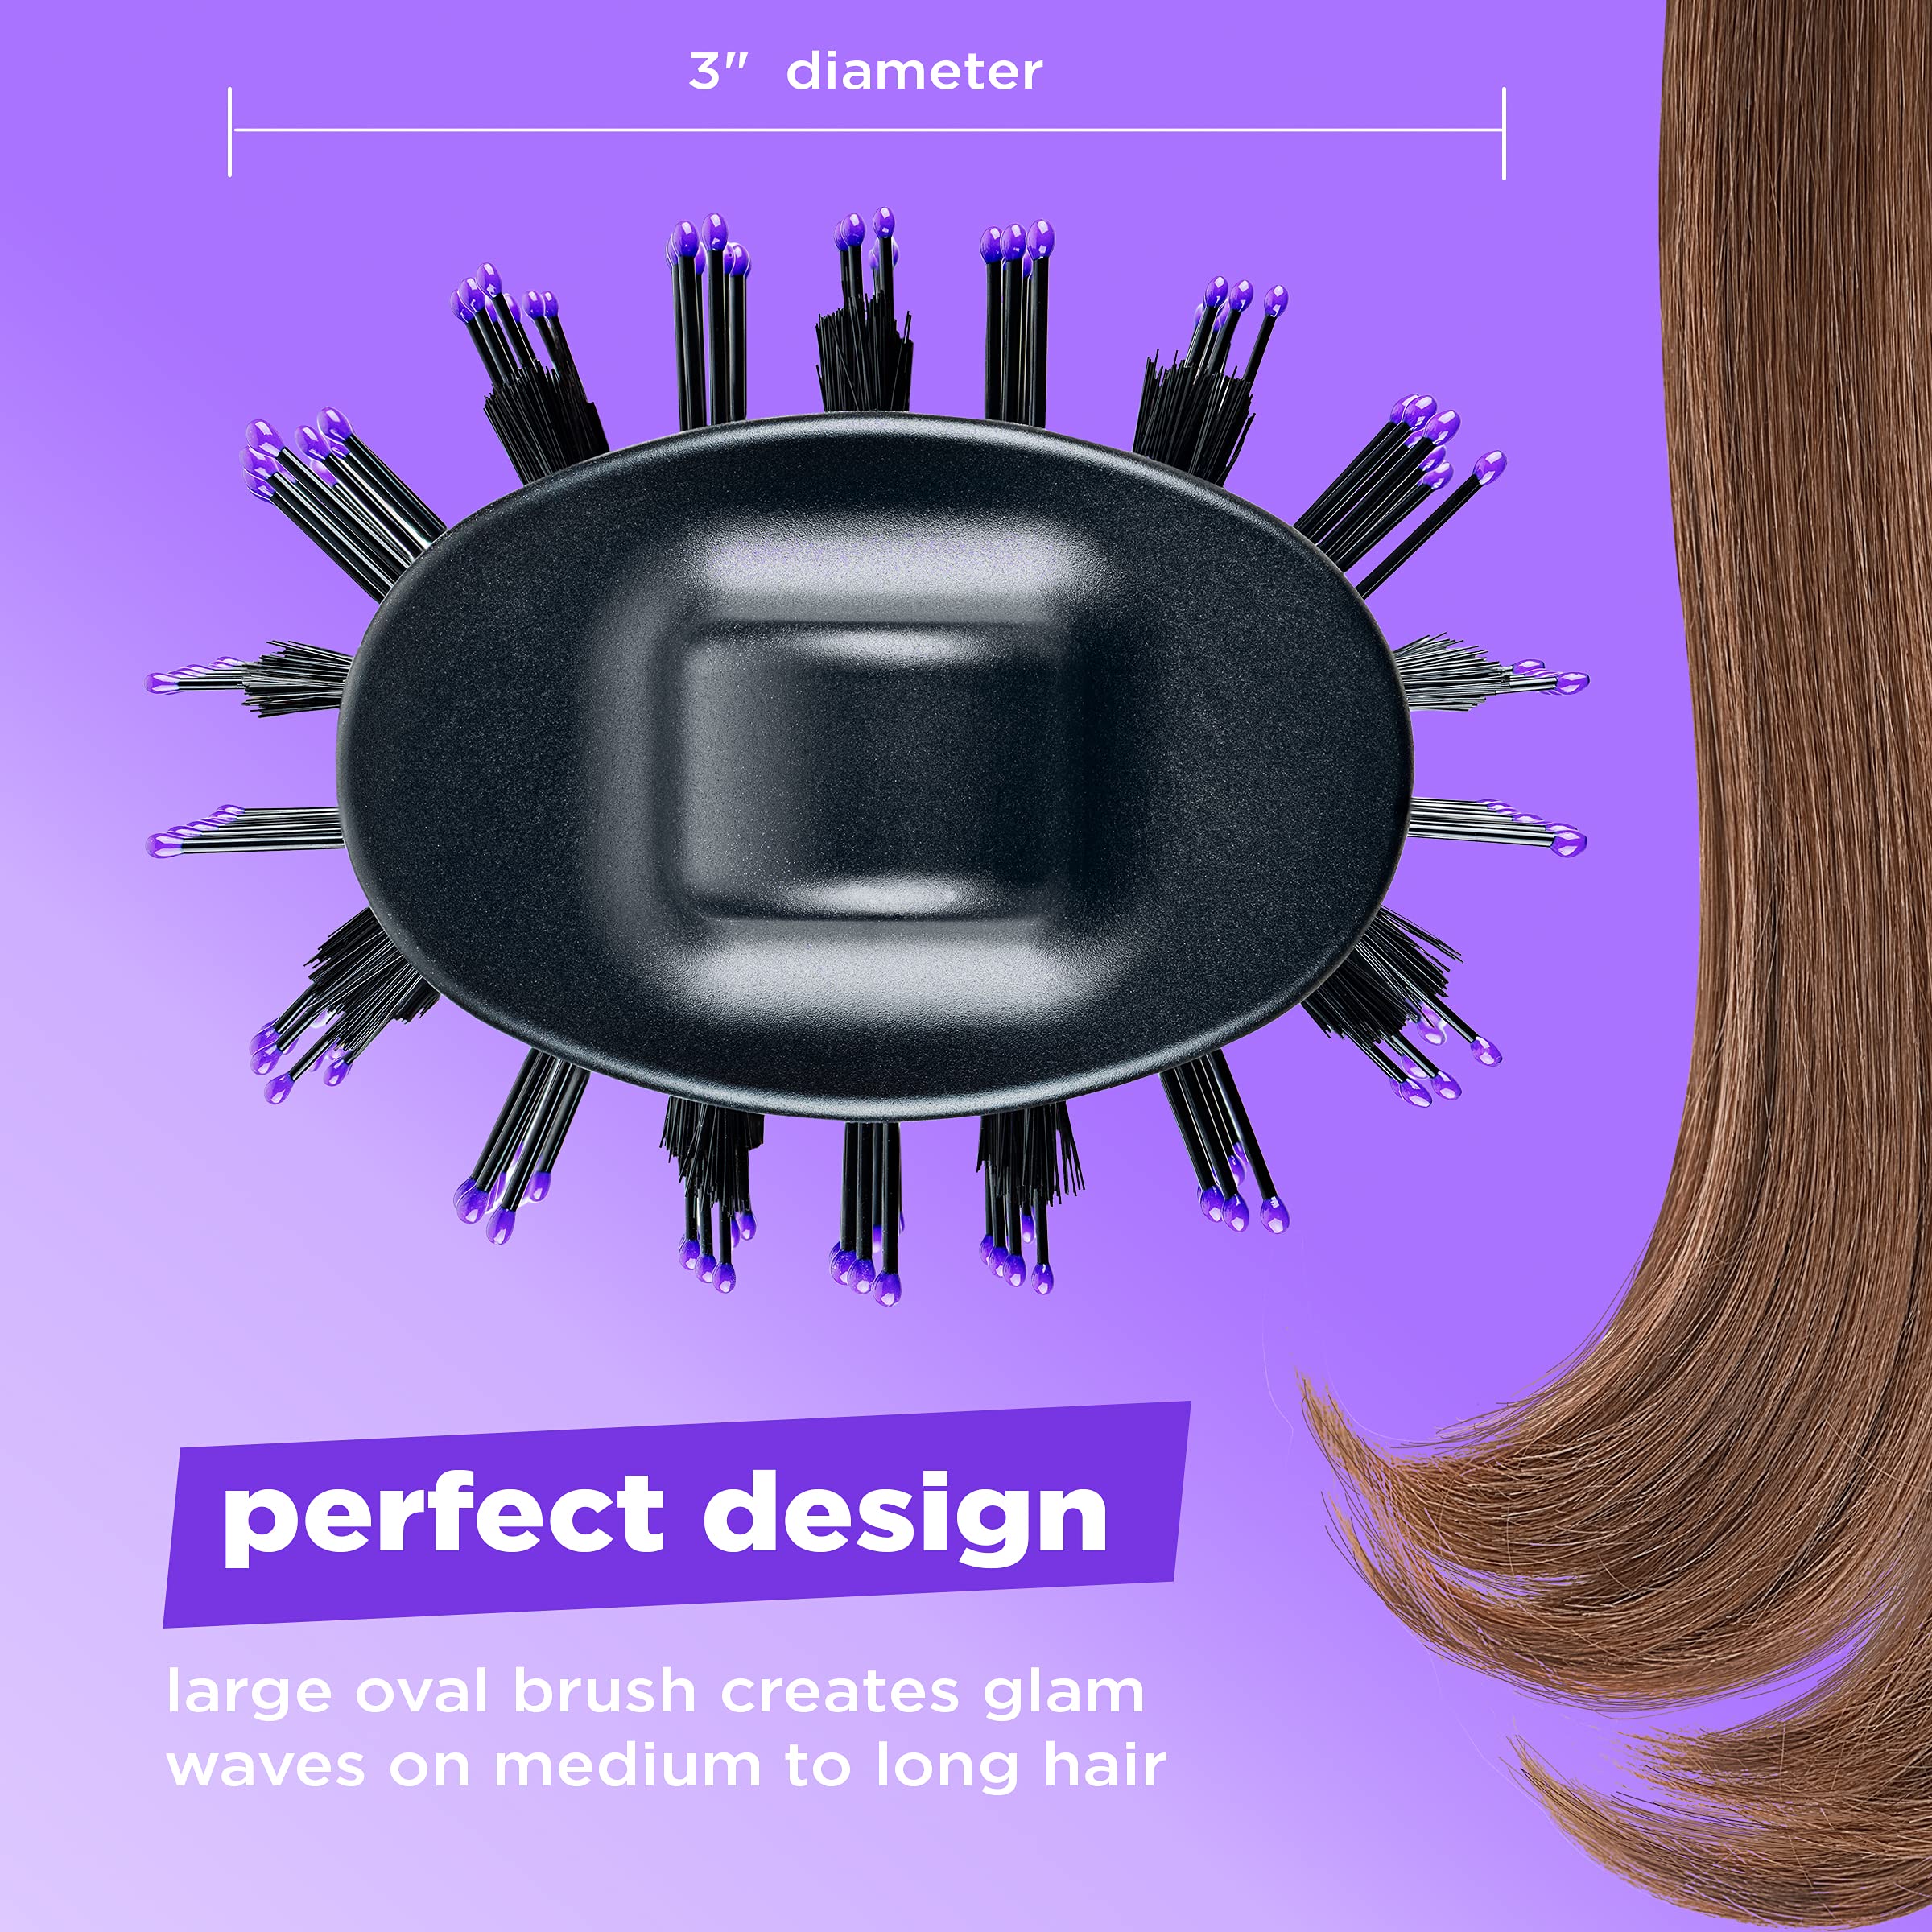 INFINITIPRO BY CONAIR The Knot Dr. All-in-One Oval Dryer Brush, Hair Dryer & Volumizer, Hot Air Brush